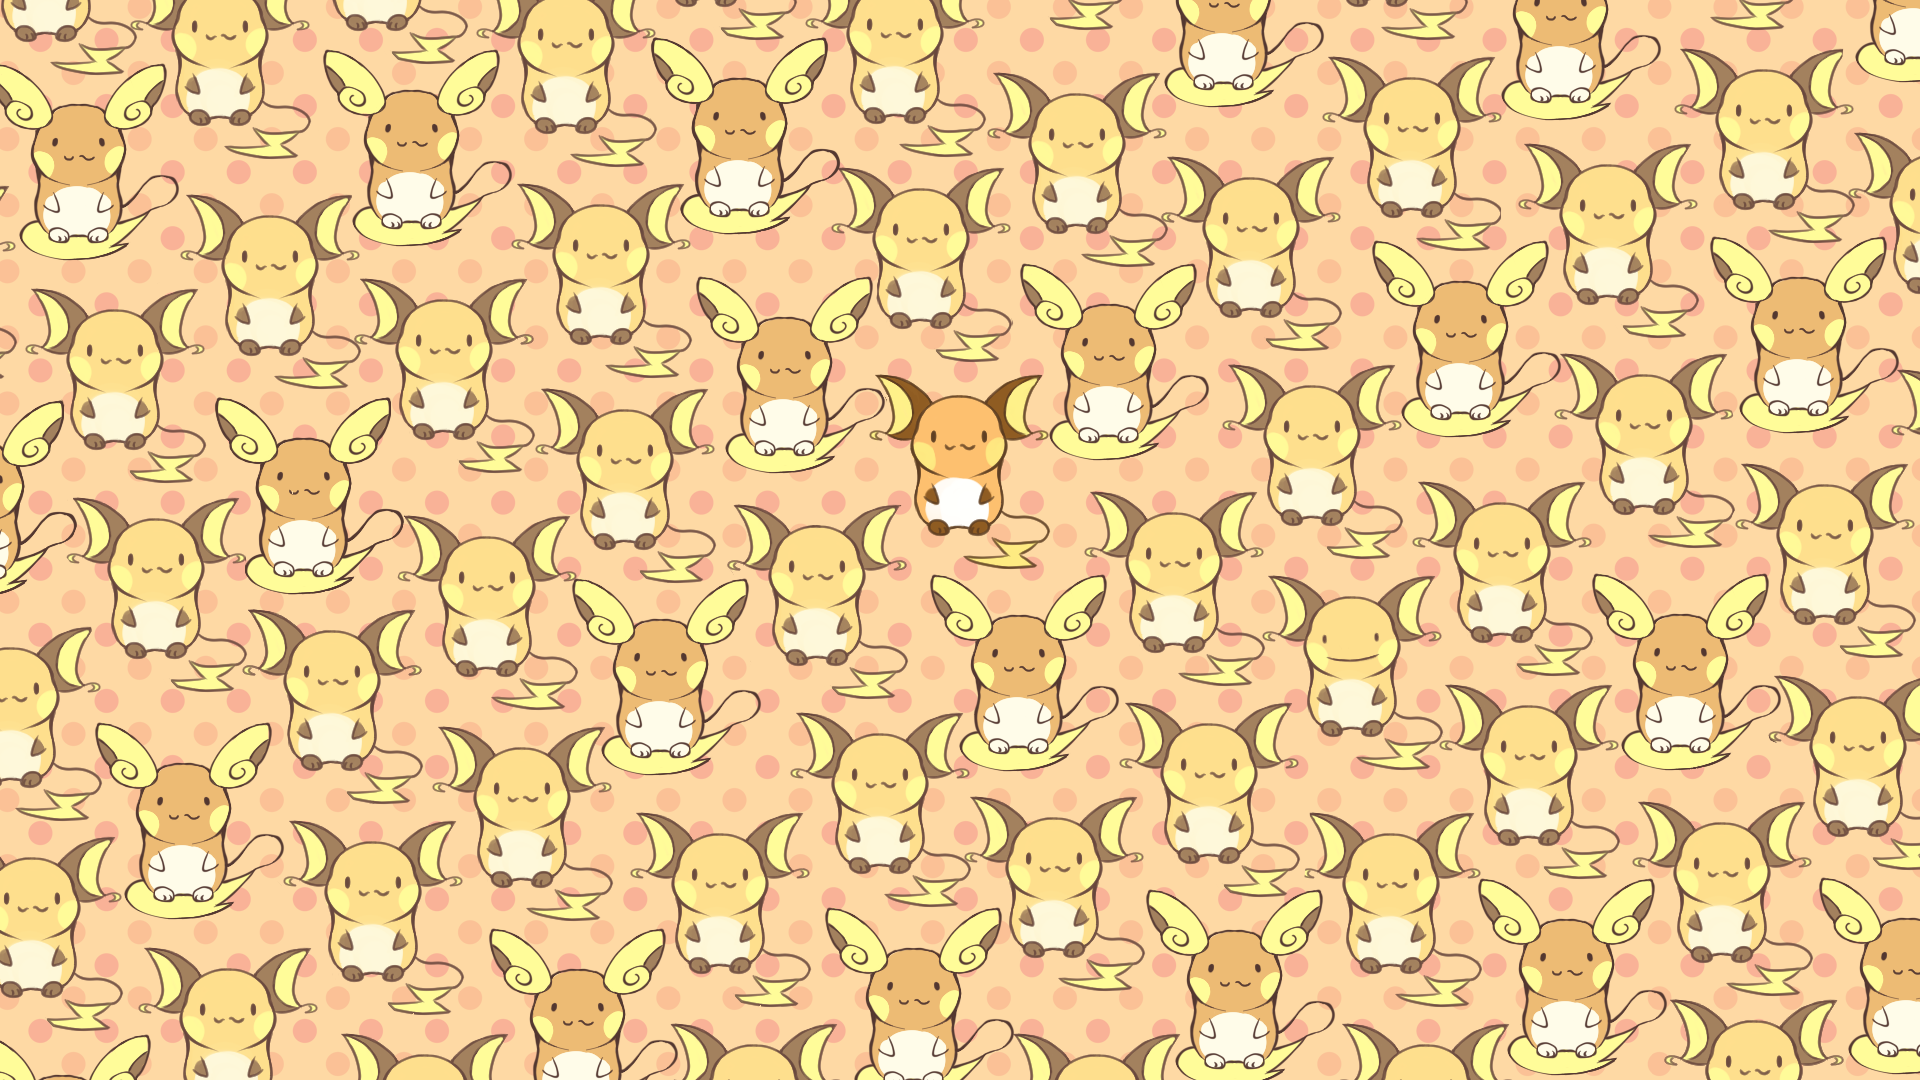 Raichu Pictures Wallpapers